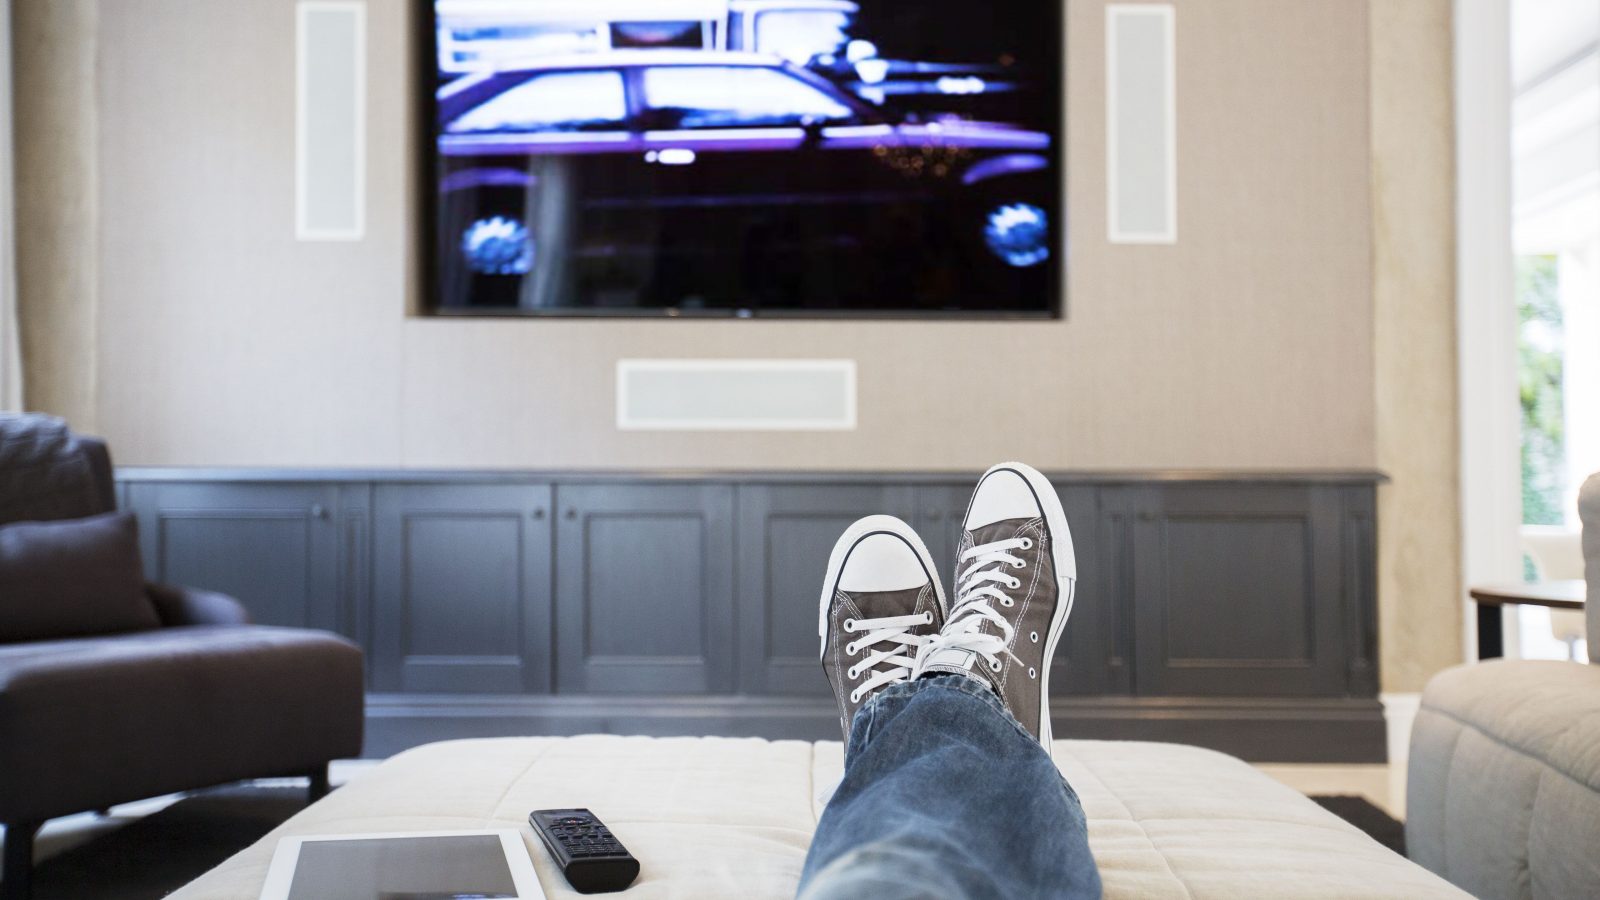 This Quiz Will Reveal Whether or Not You Fall in 💖 Love Easily Watching TV